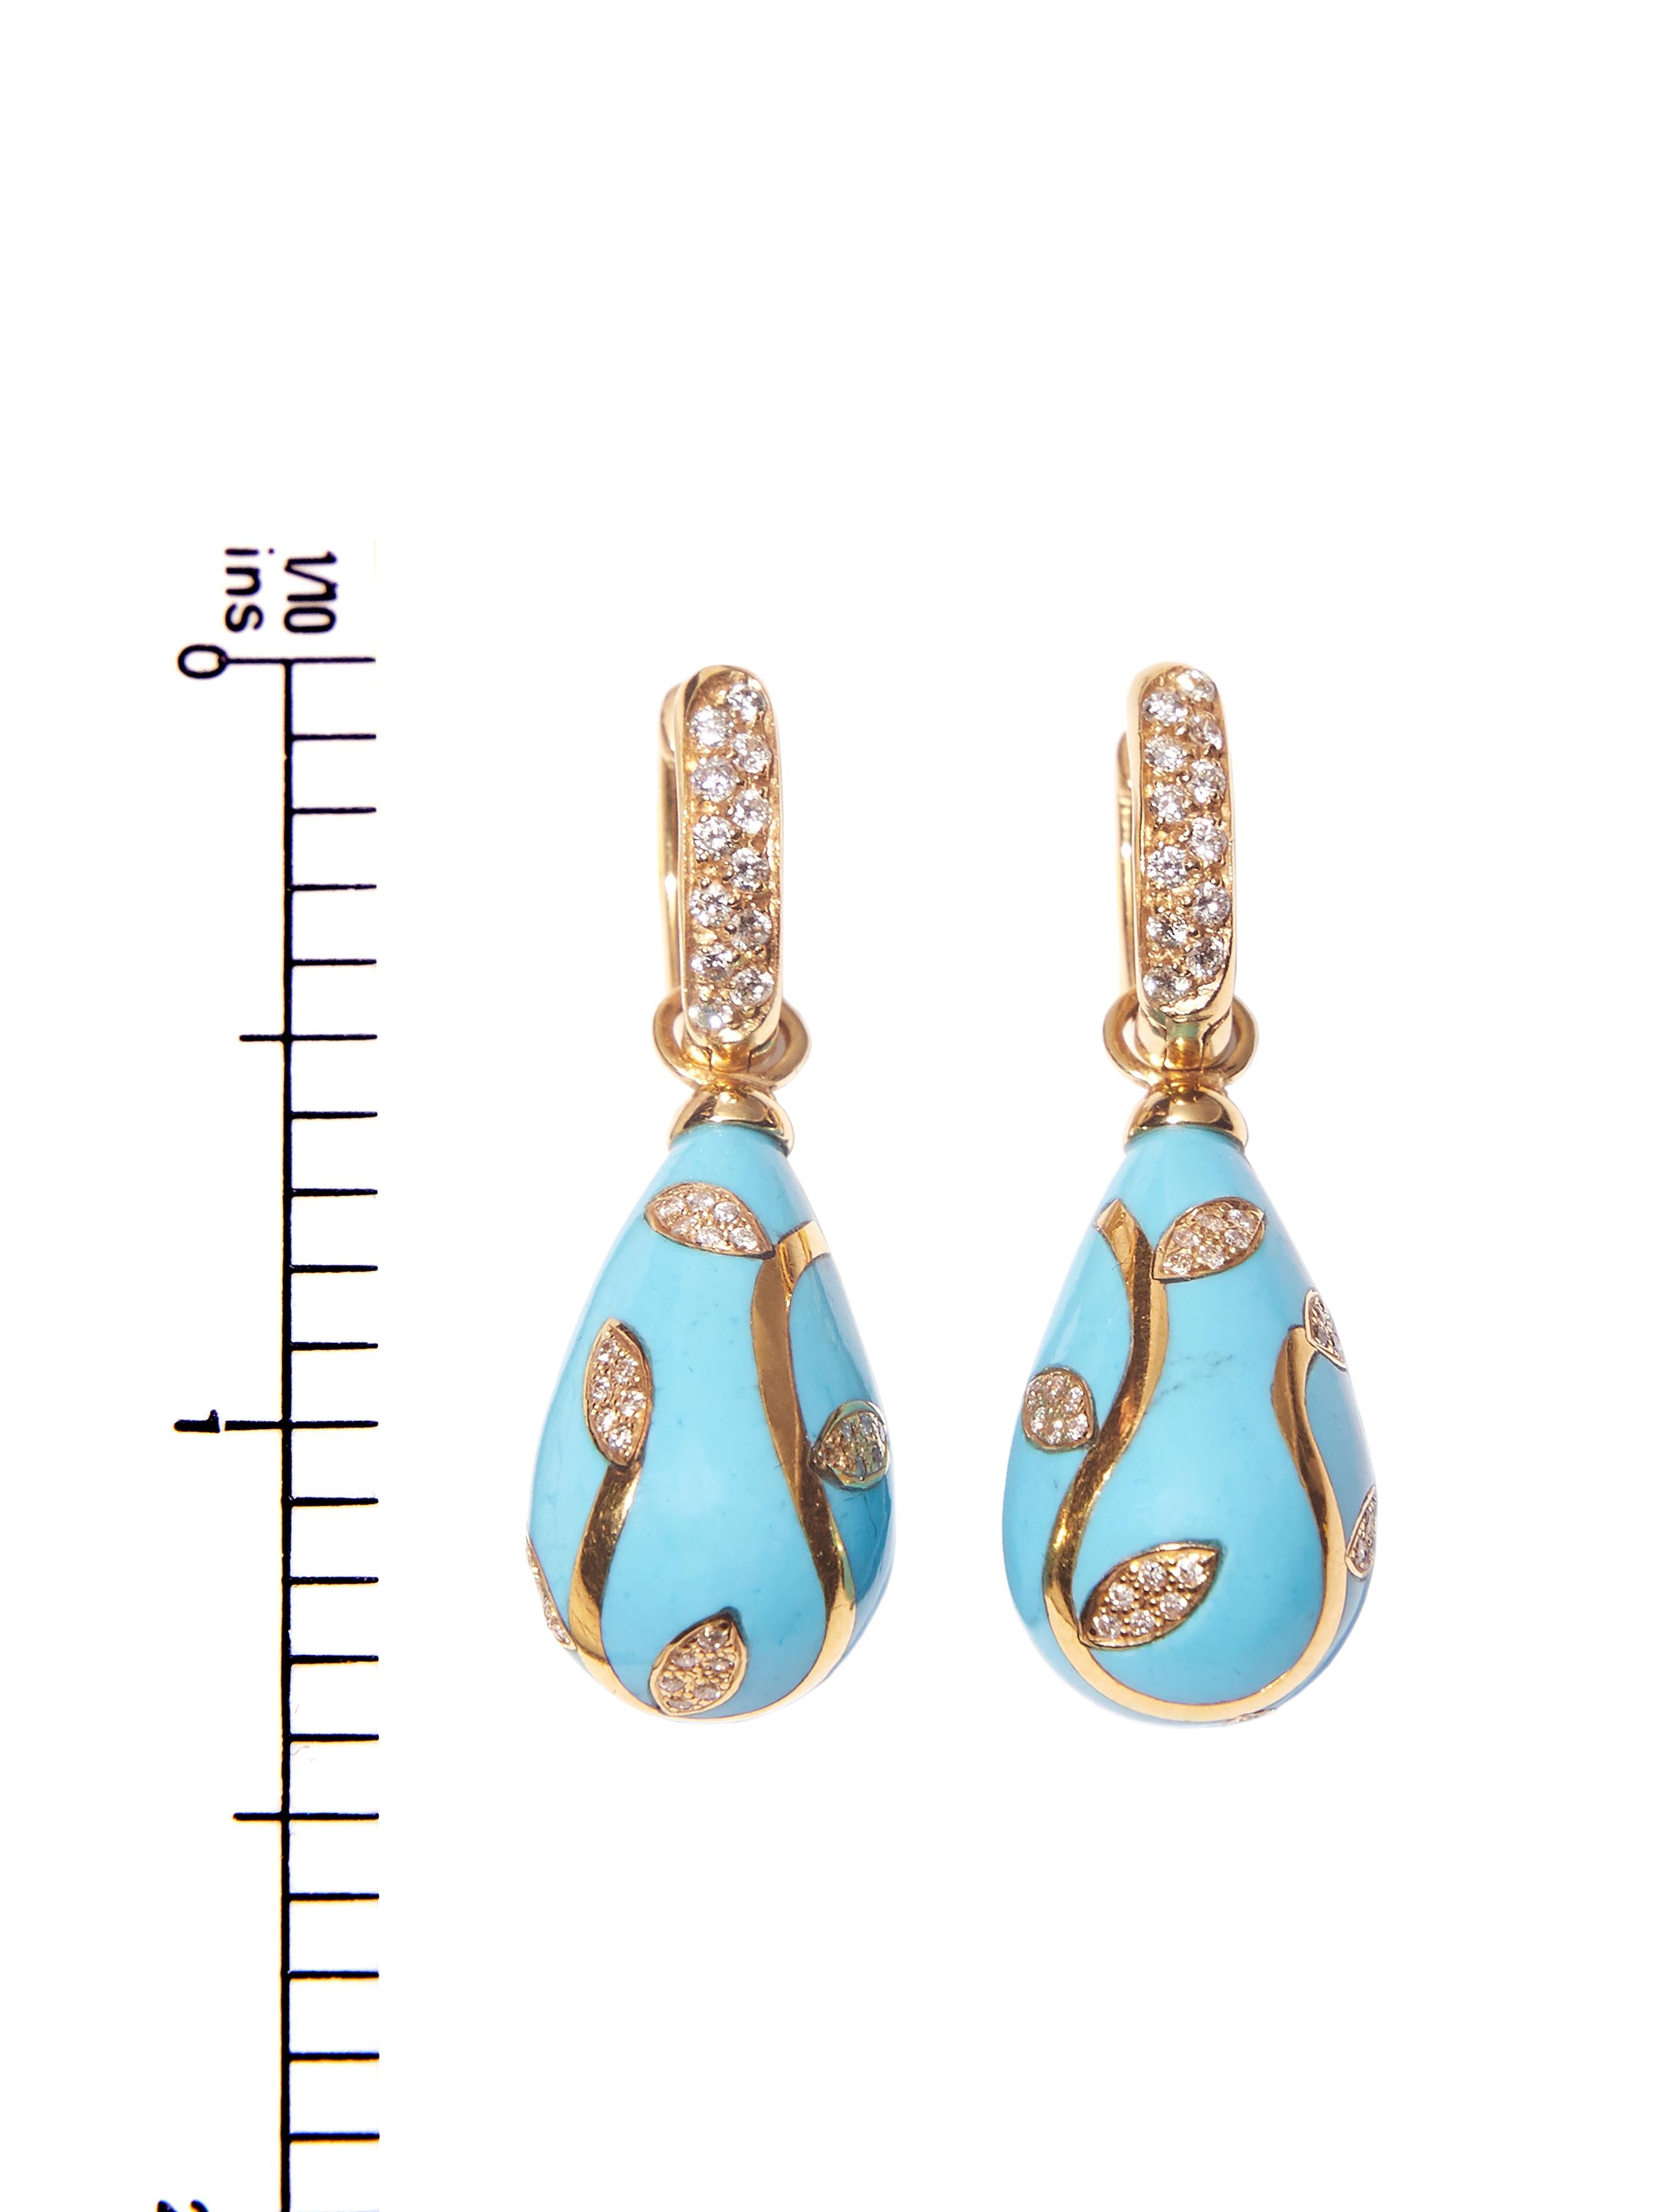 Round Cut Turquoise Earrrings with 18 karat Yellow Gold Inlay Set with Diamonds